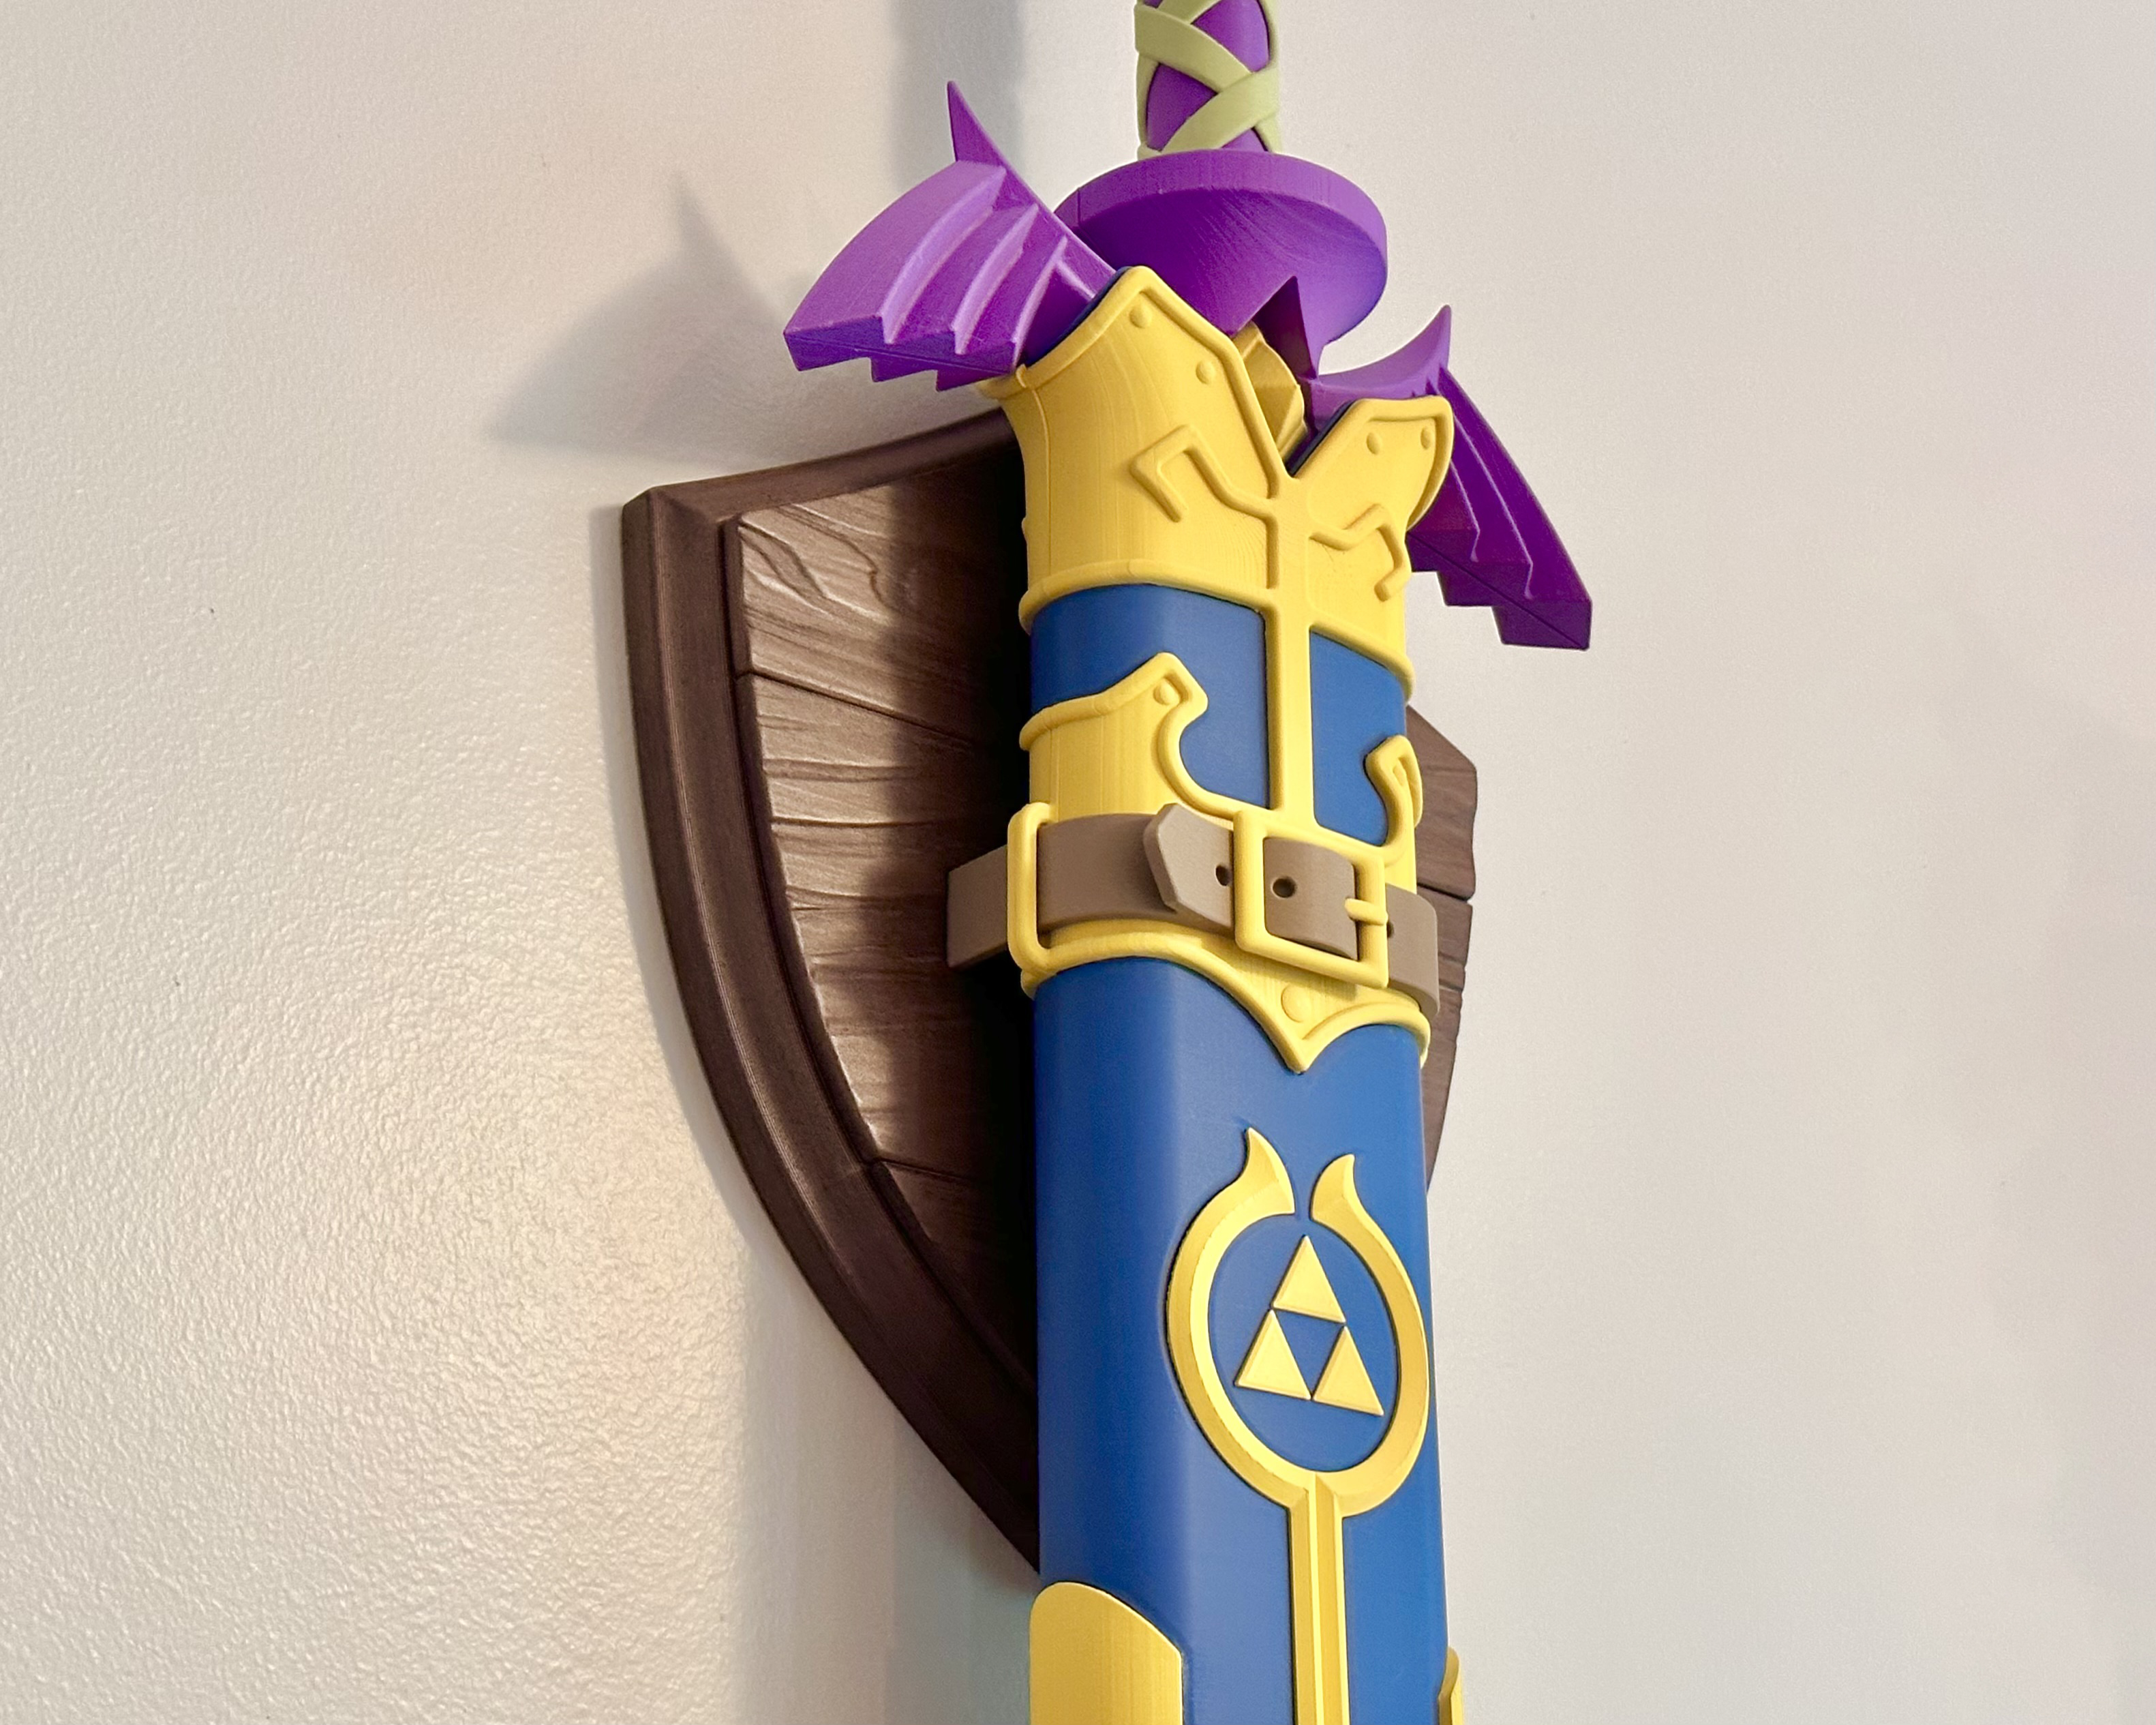 TOTK] What if fusing two swords gets you this? : r/zelda